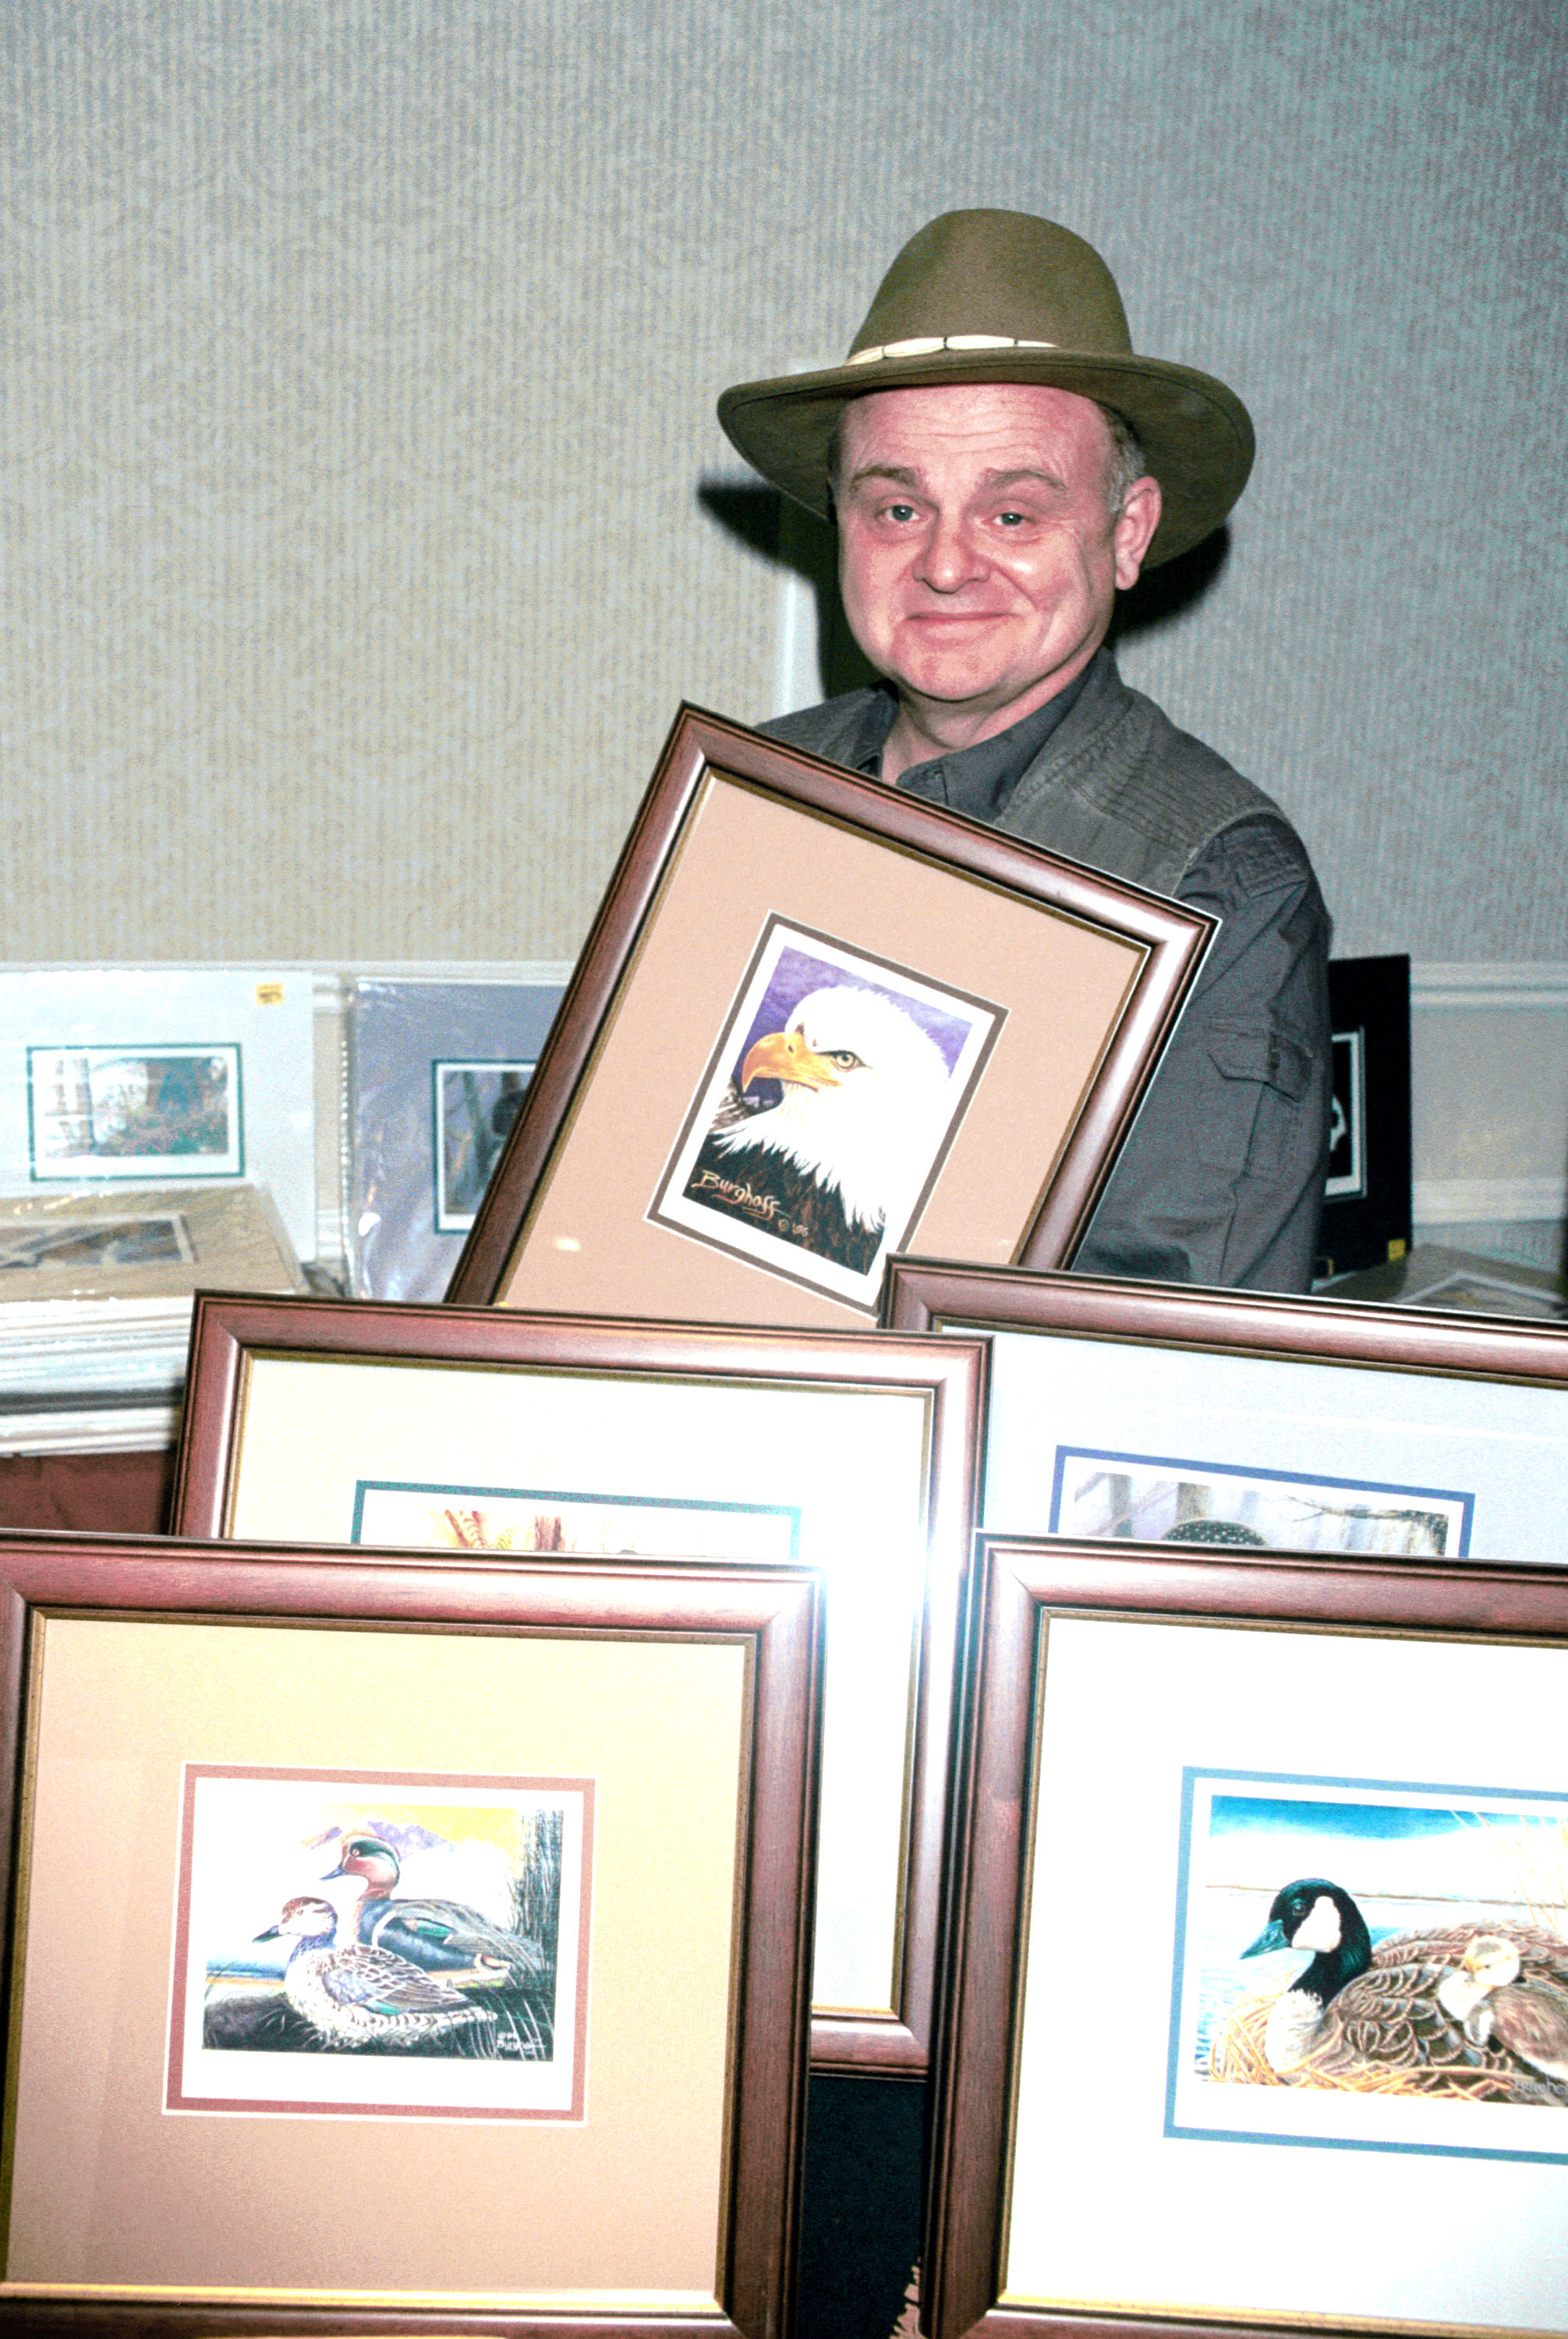 Gary Burghoff at the "Hollywood Collectors and Celebrities Show" on April 7, 2001, in North Hollywood, California | Source: Getty Images